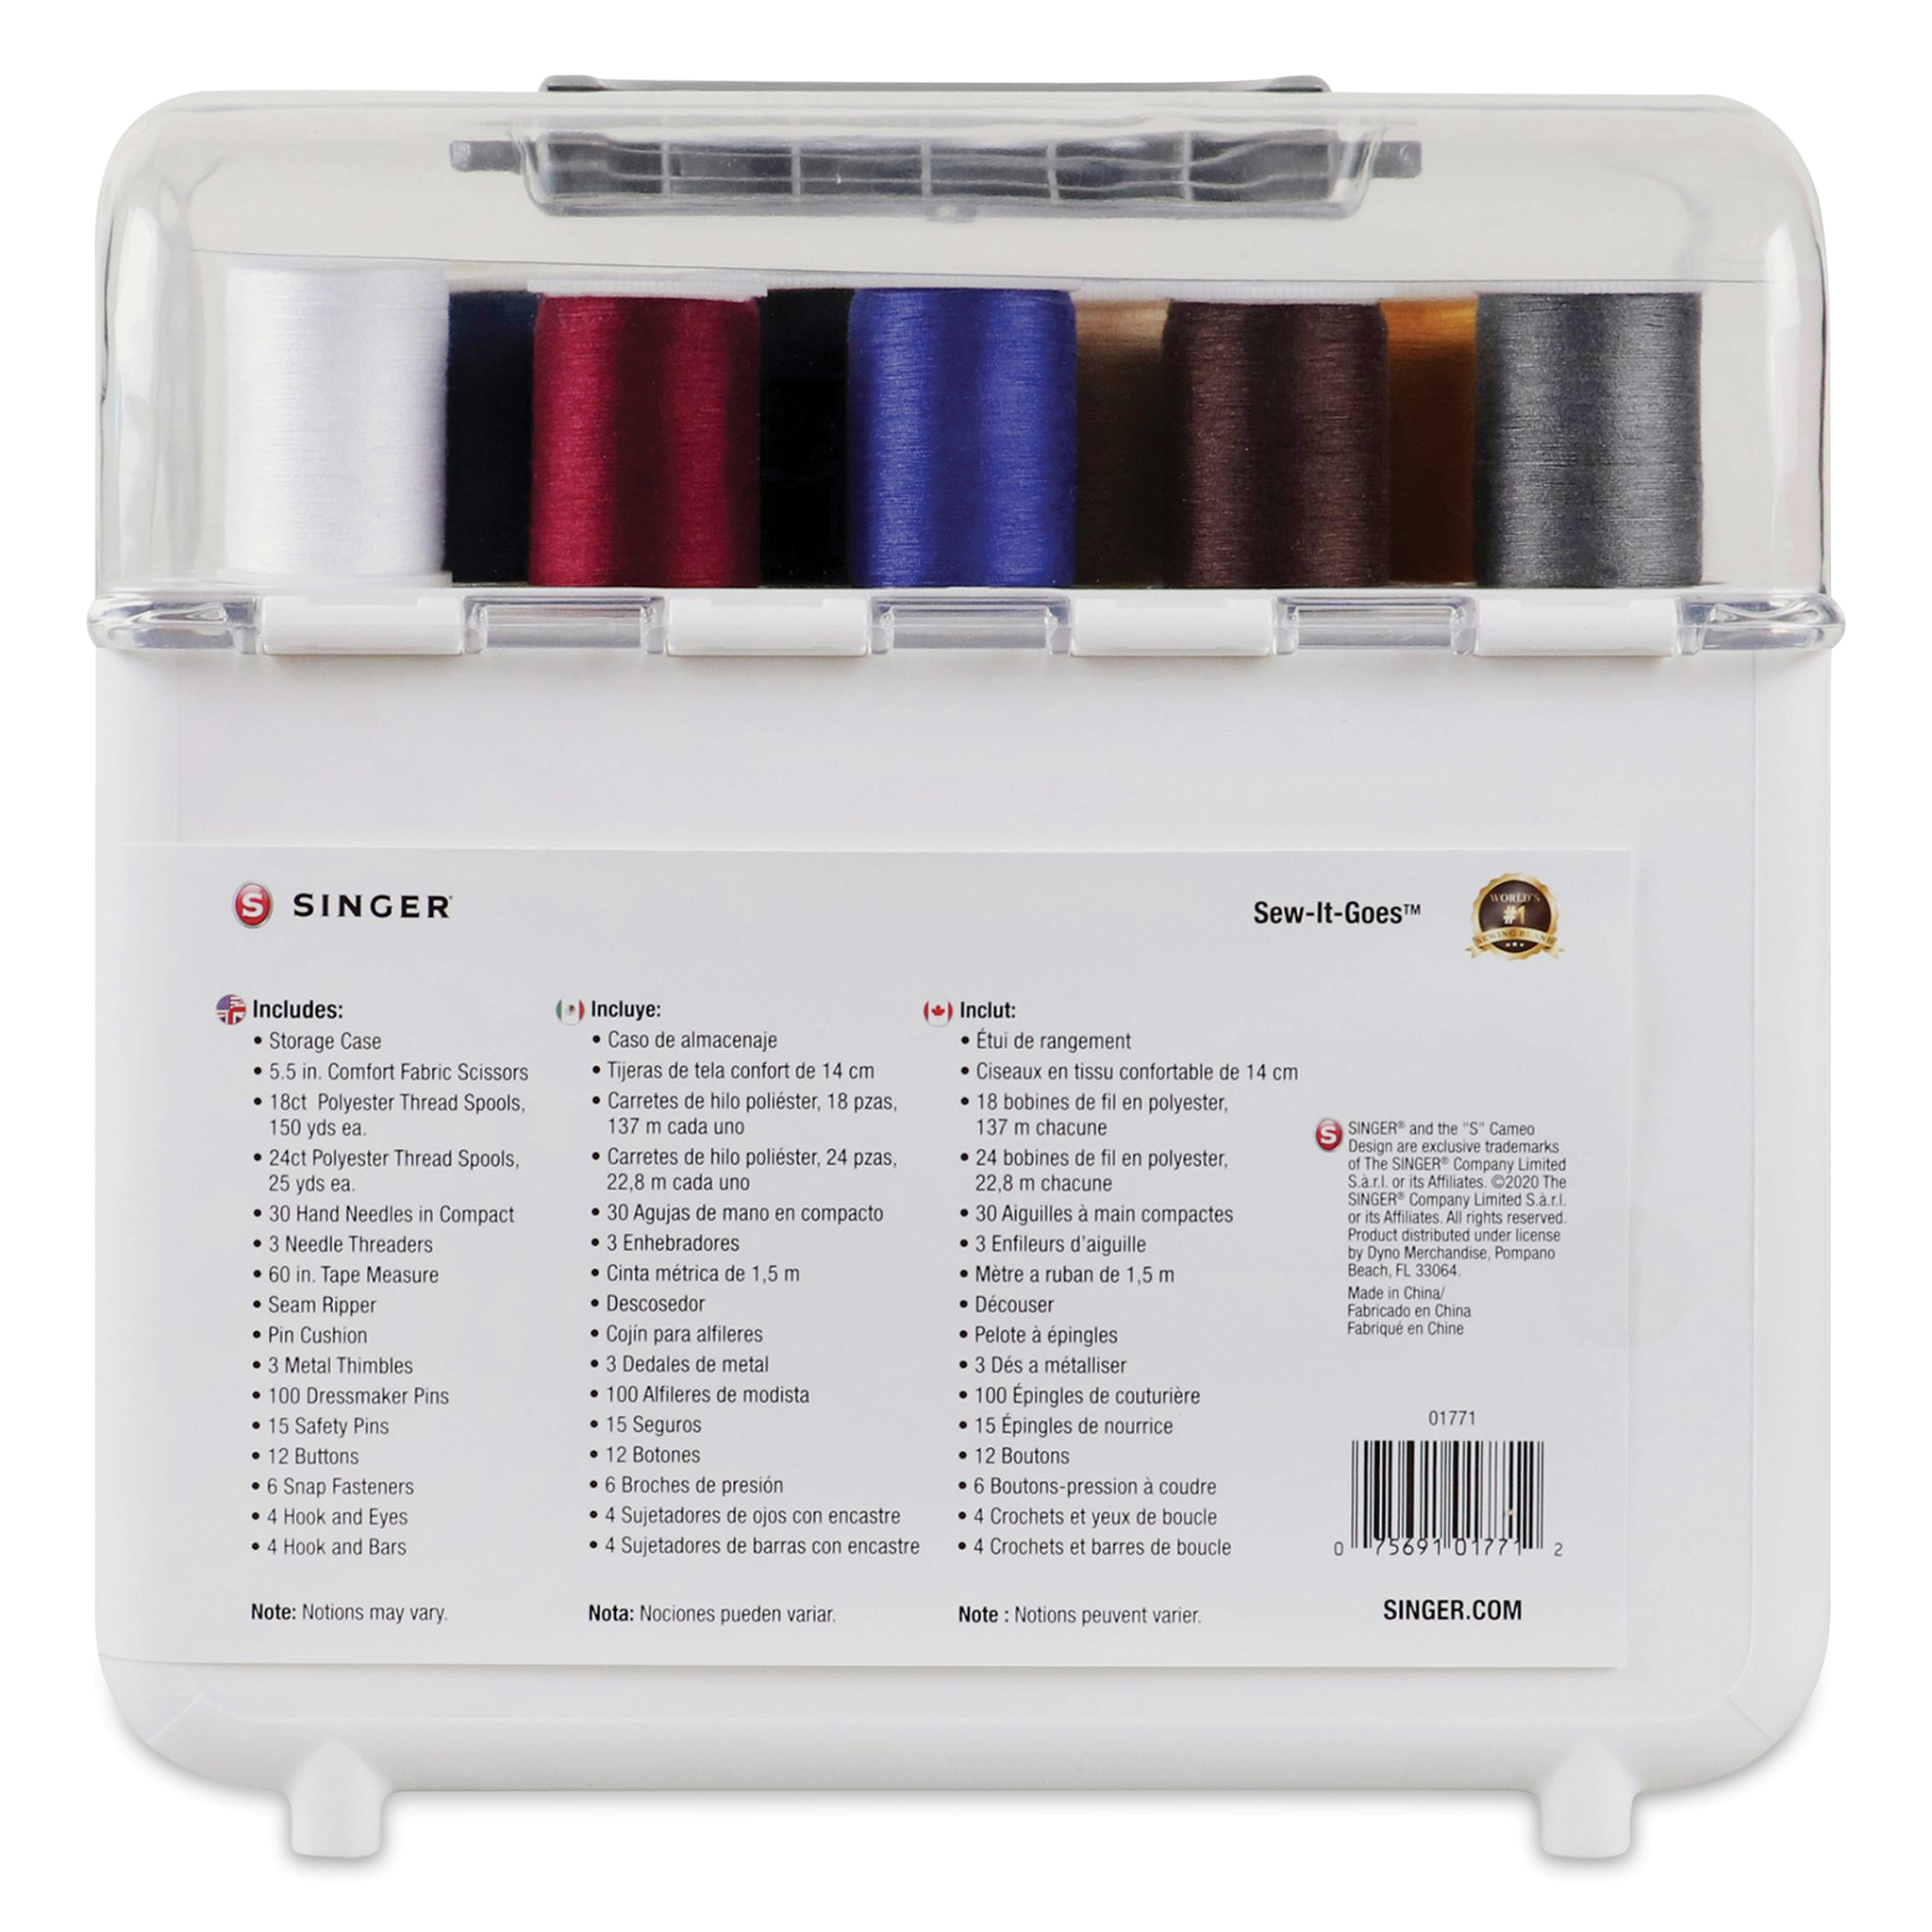 Singer Sew-It-Goes Sewing and Craft Storage Kit